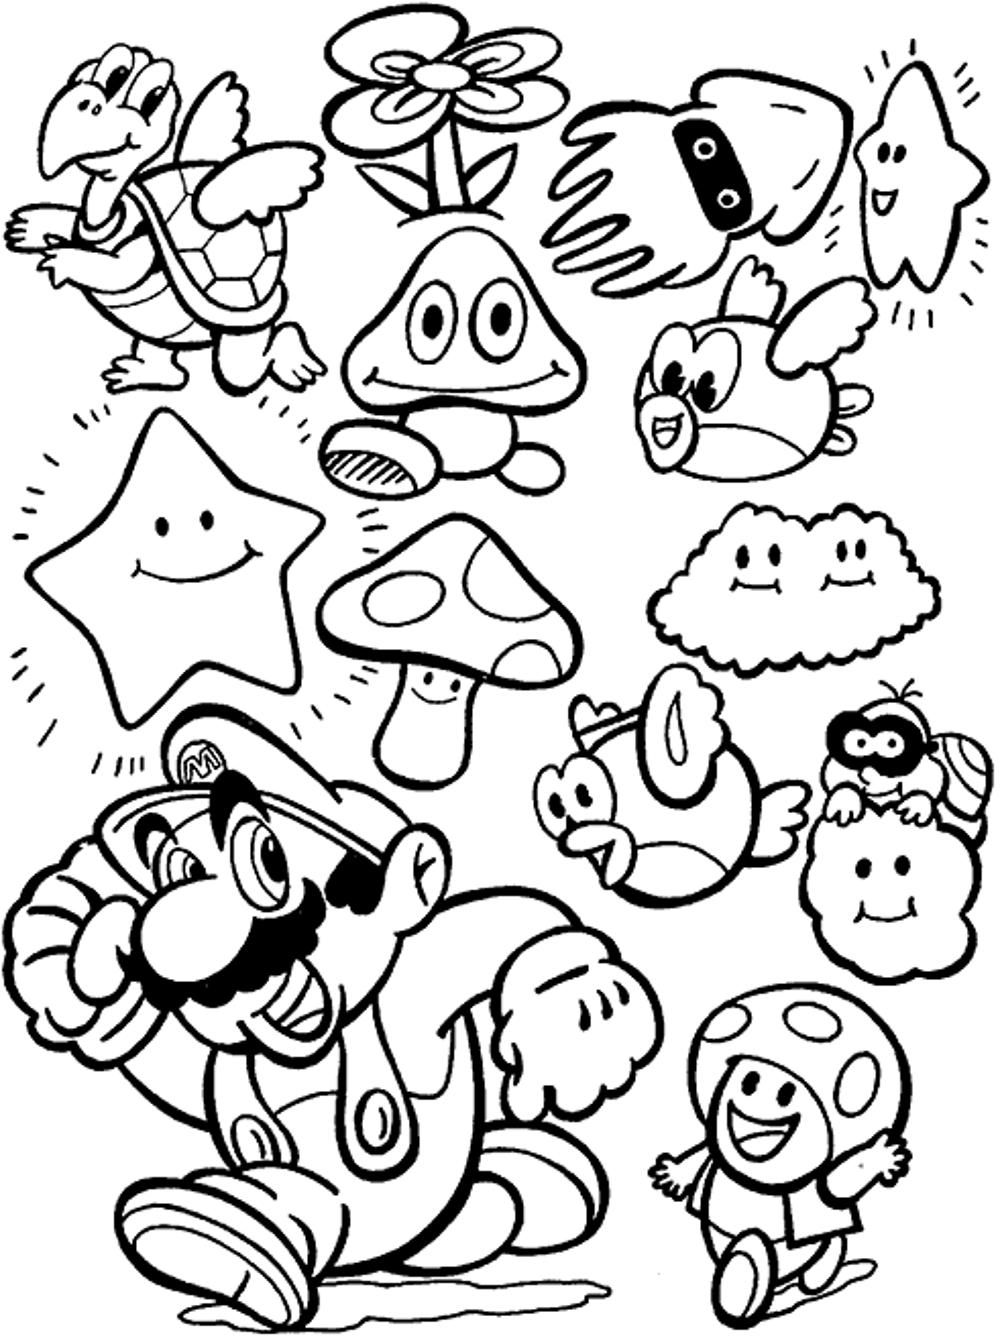 Super Mario Coloring Pictures - Coloring Pages for Kids and for Adults